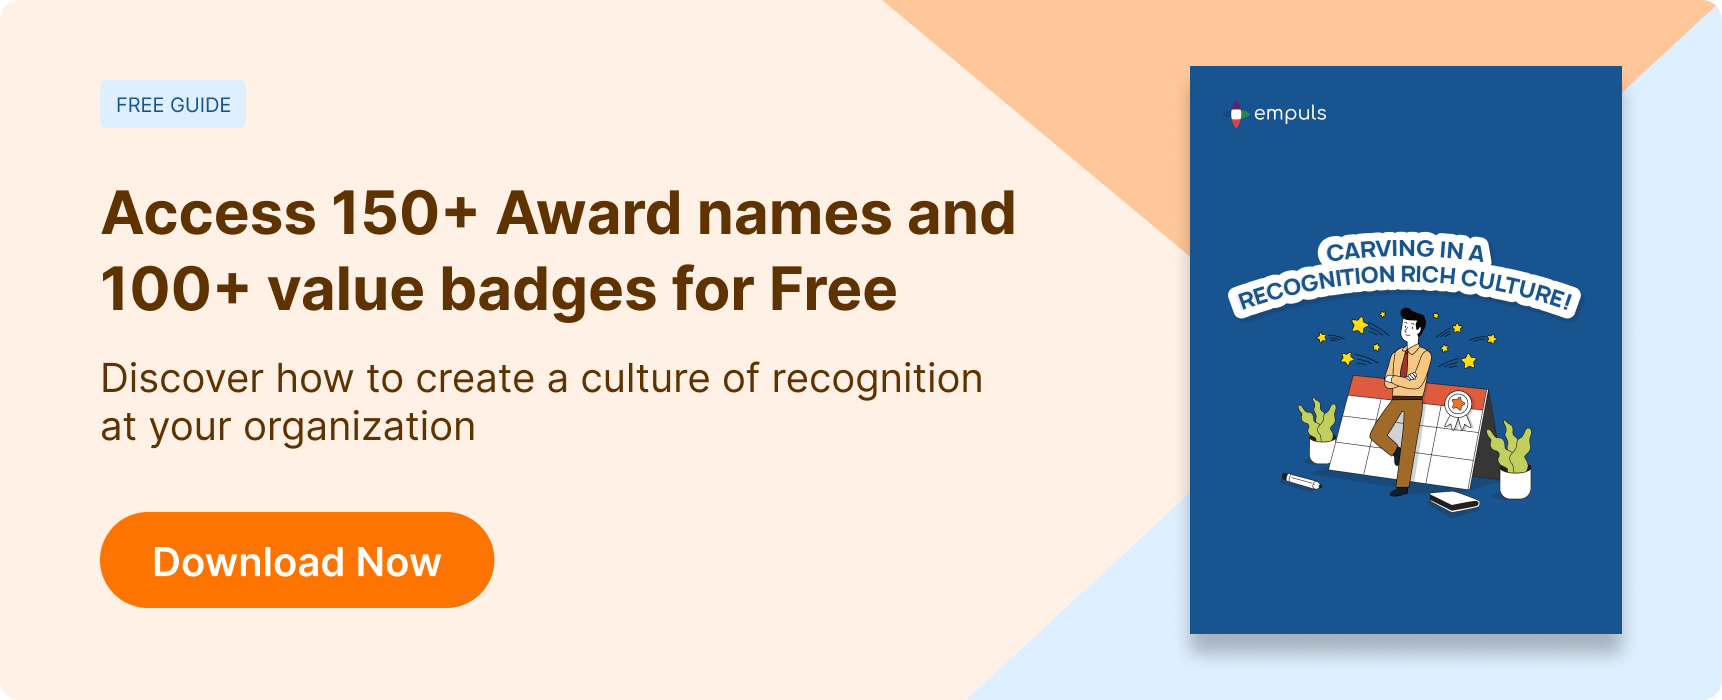 Guide to buidling a great recognition culture in the workplace